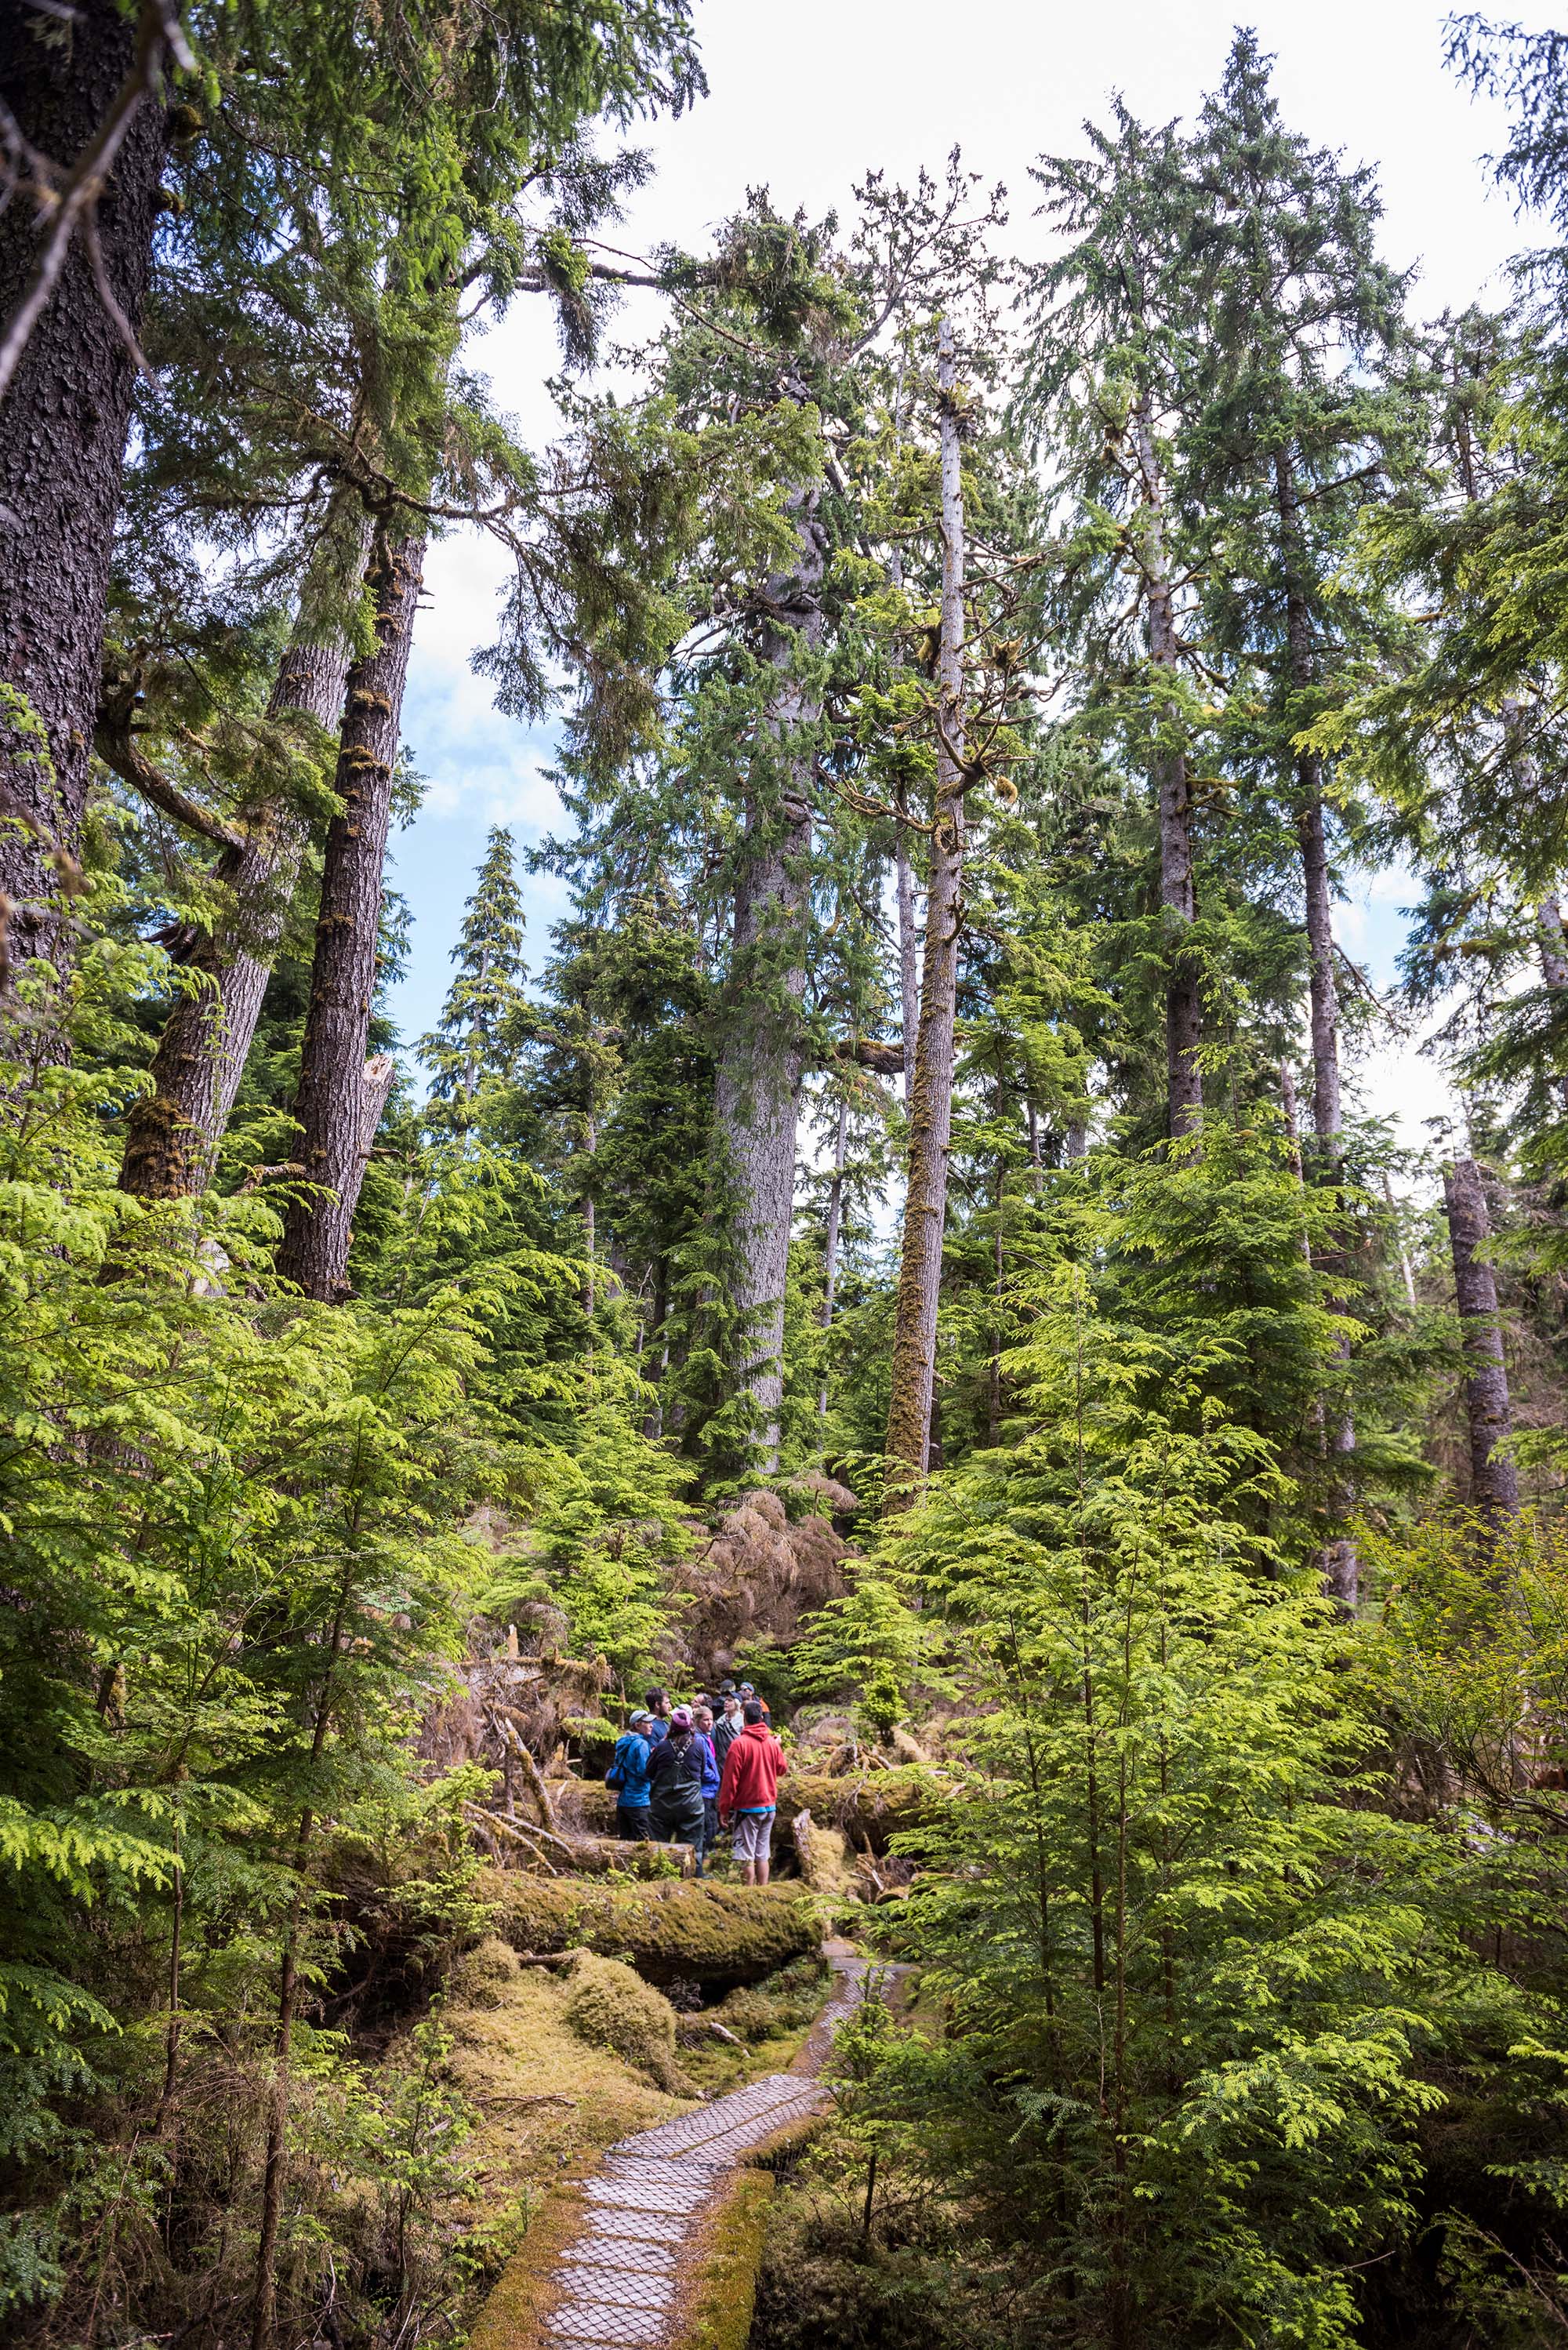 A group of people on a trail looking up at tall trees